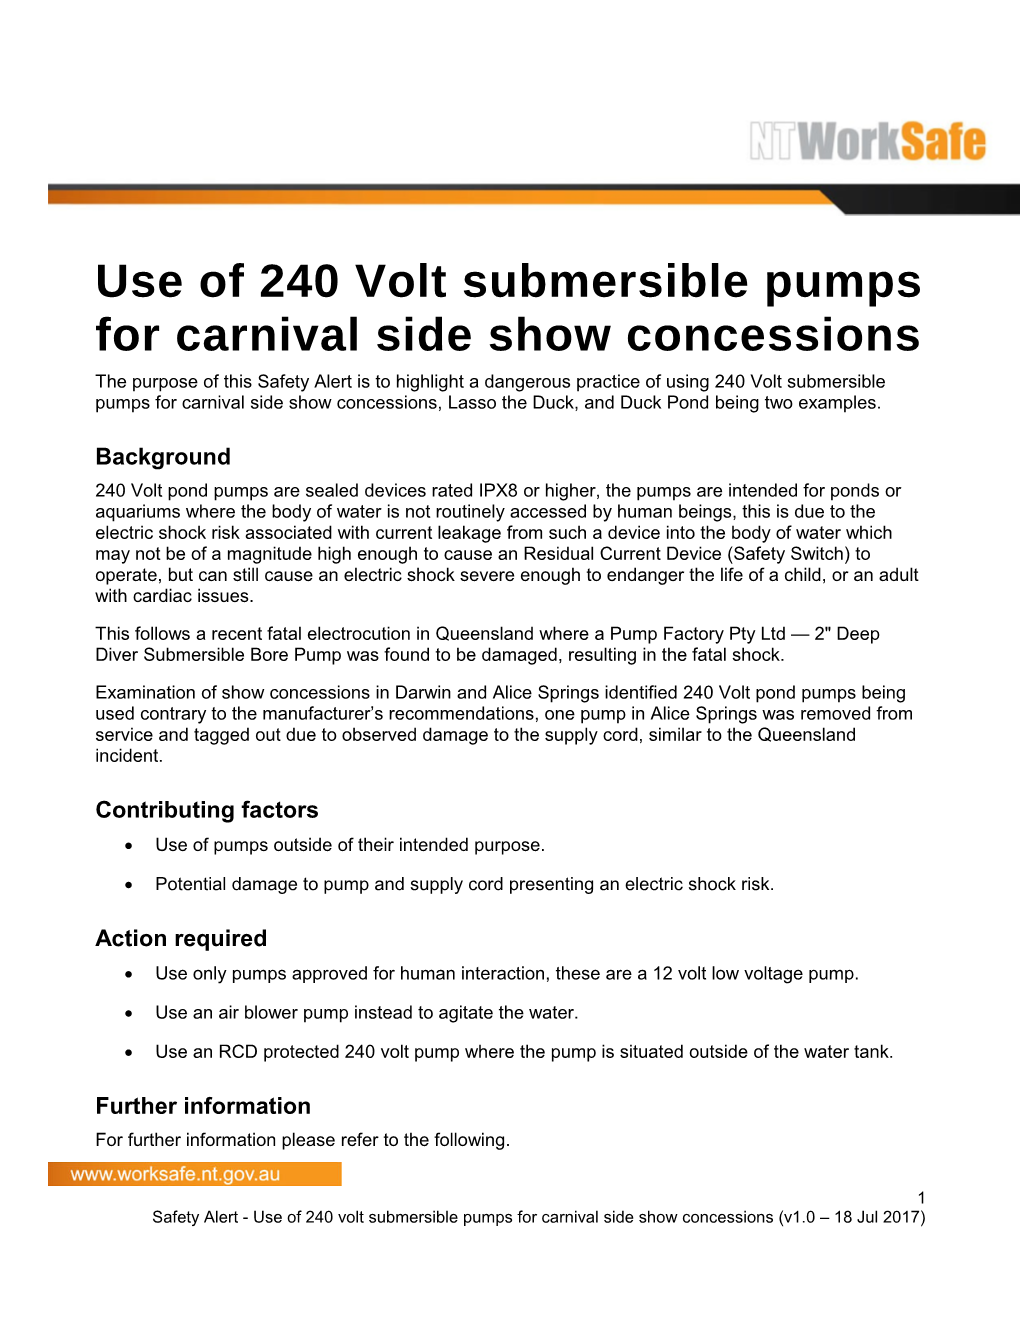 Safety Alert - Use of 240 Volt Submersible Pumps for Carnival Side Show Concessions